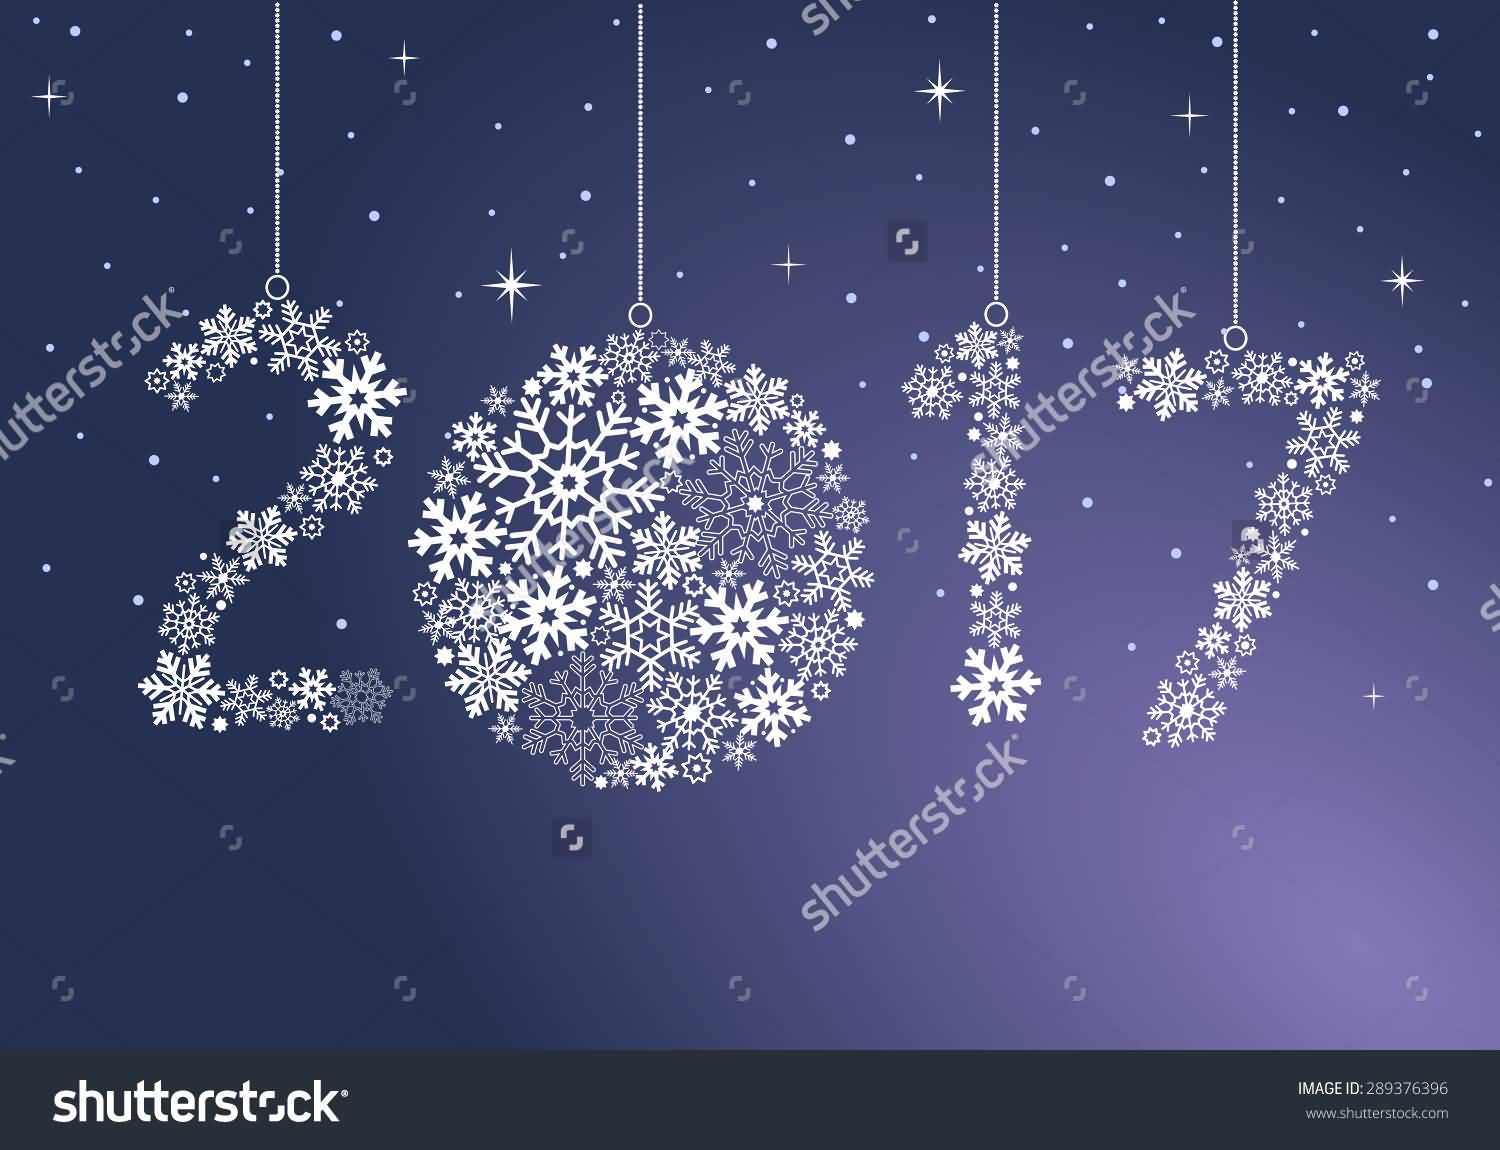 clipart new year greetings - photo #32